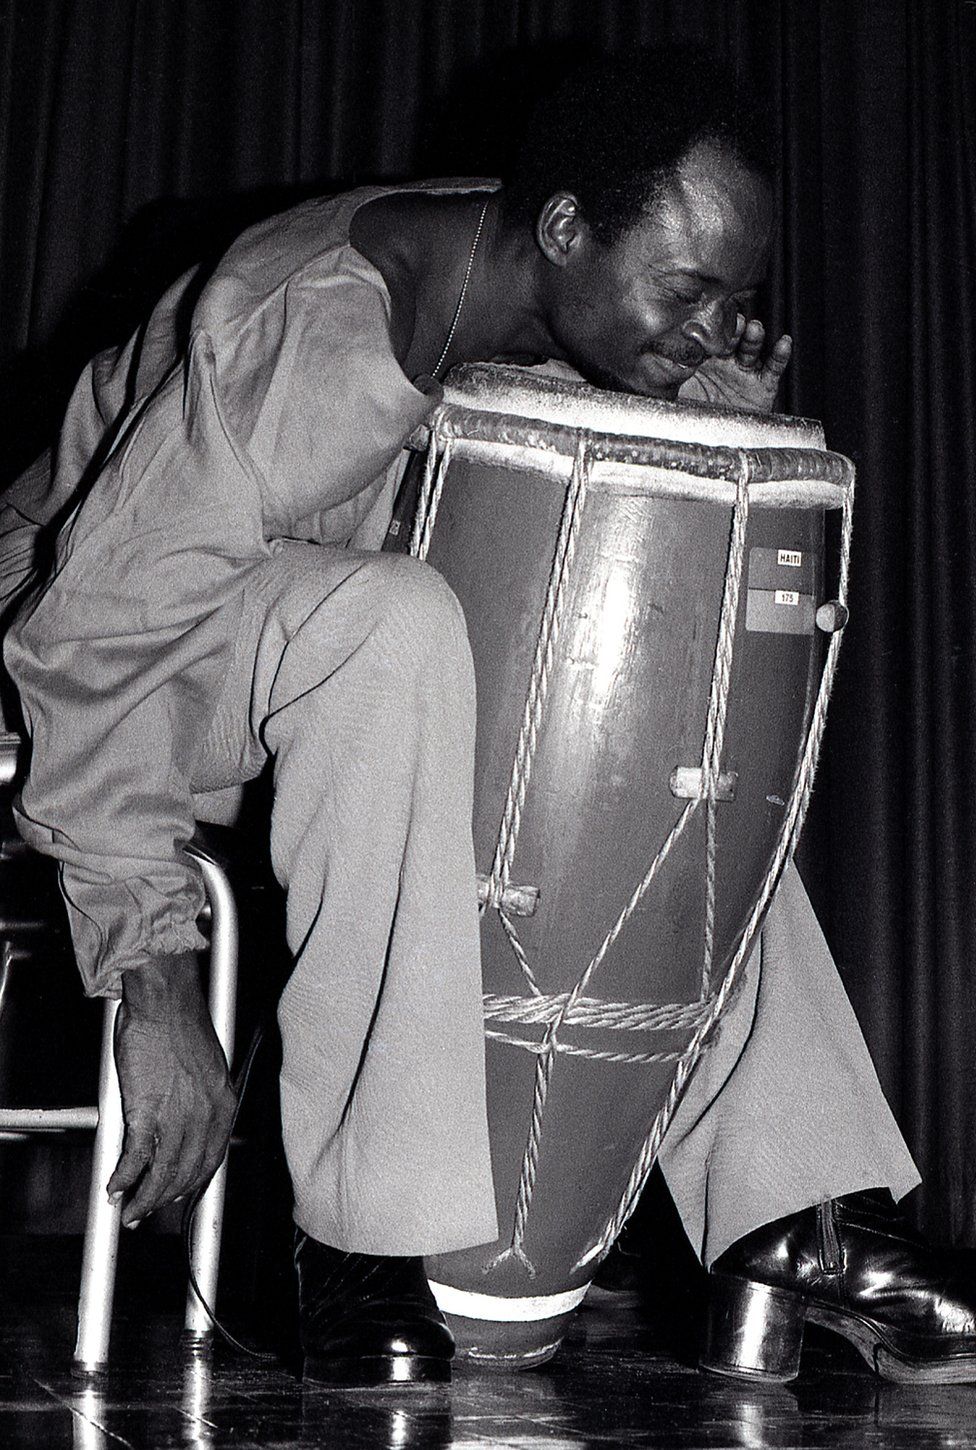 A man leans his chin onto a drum as he plays it, he is elated